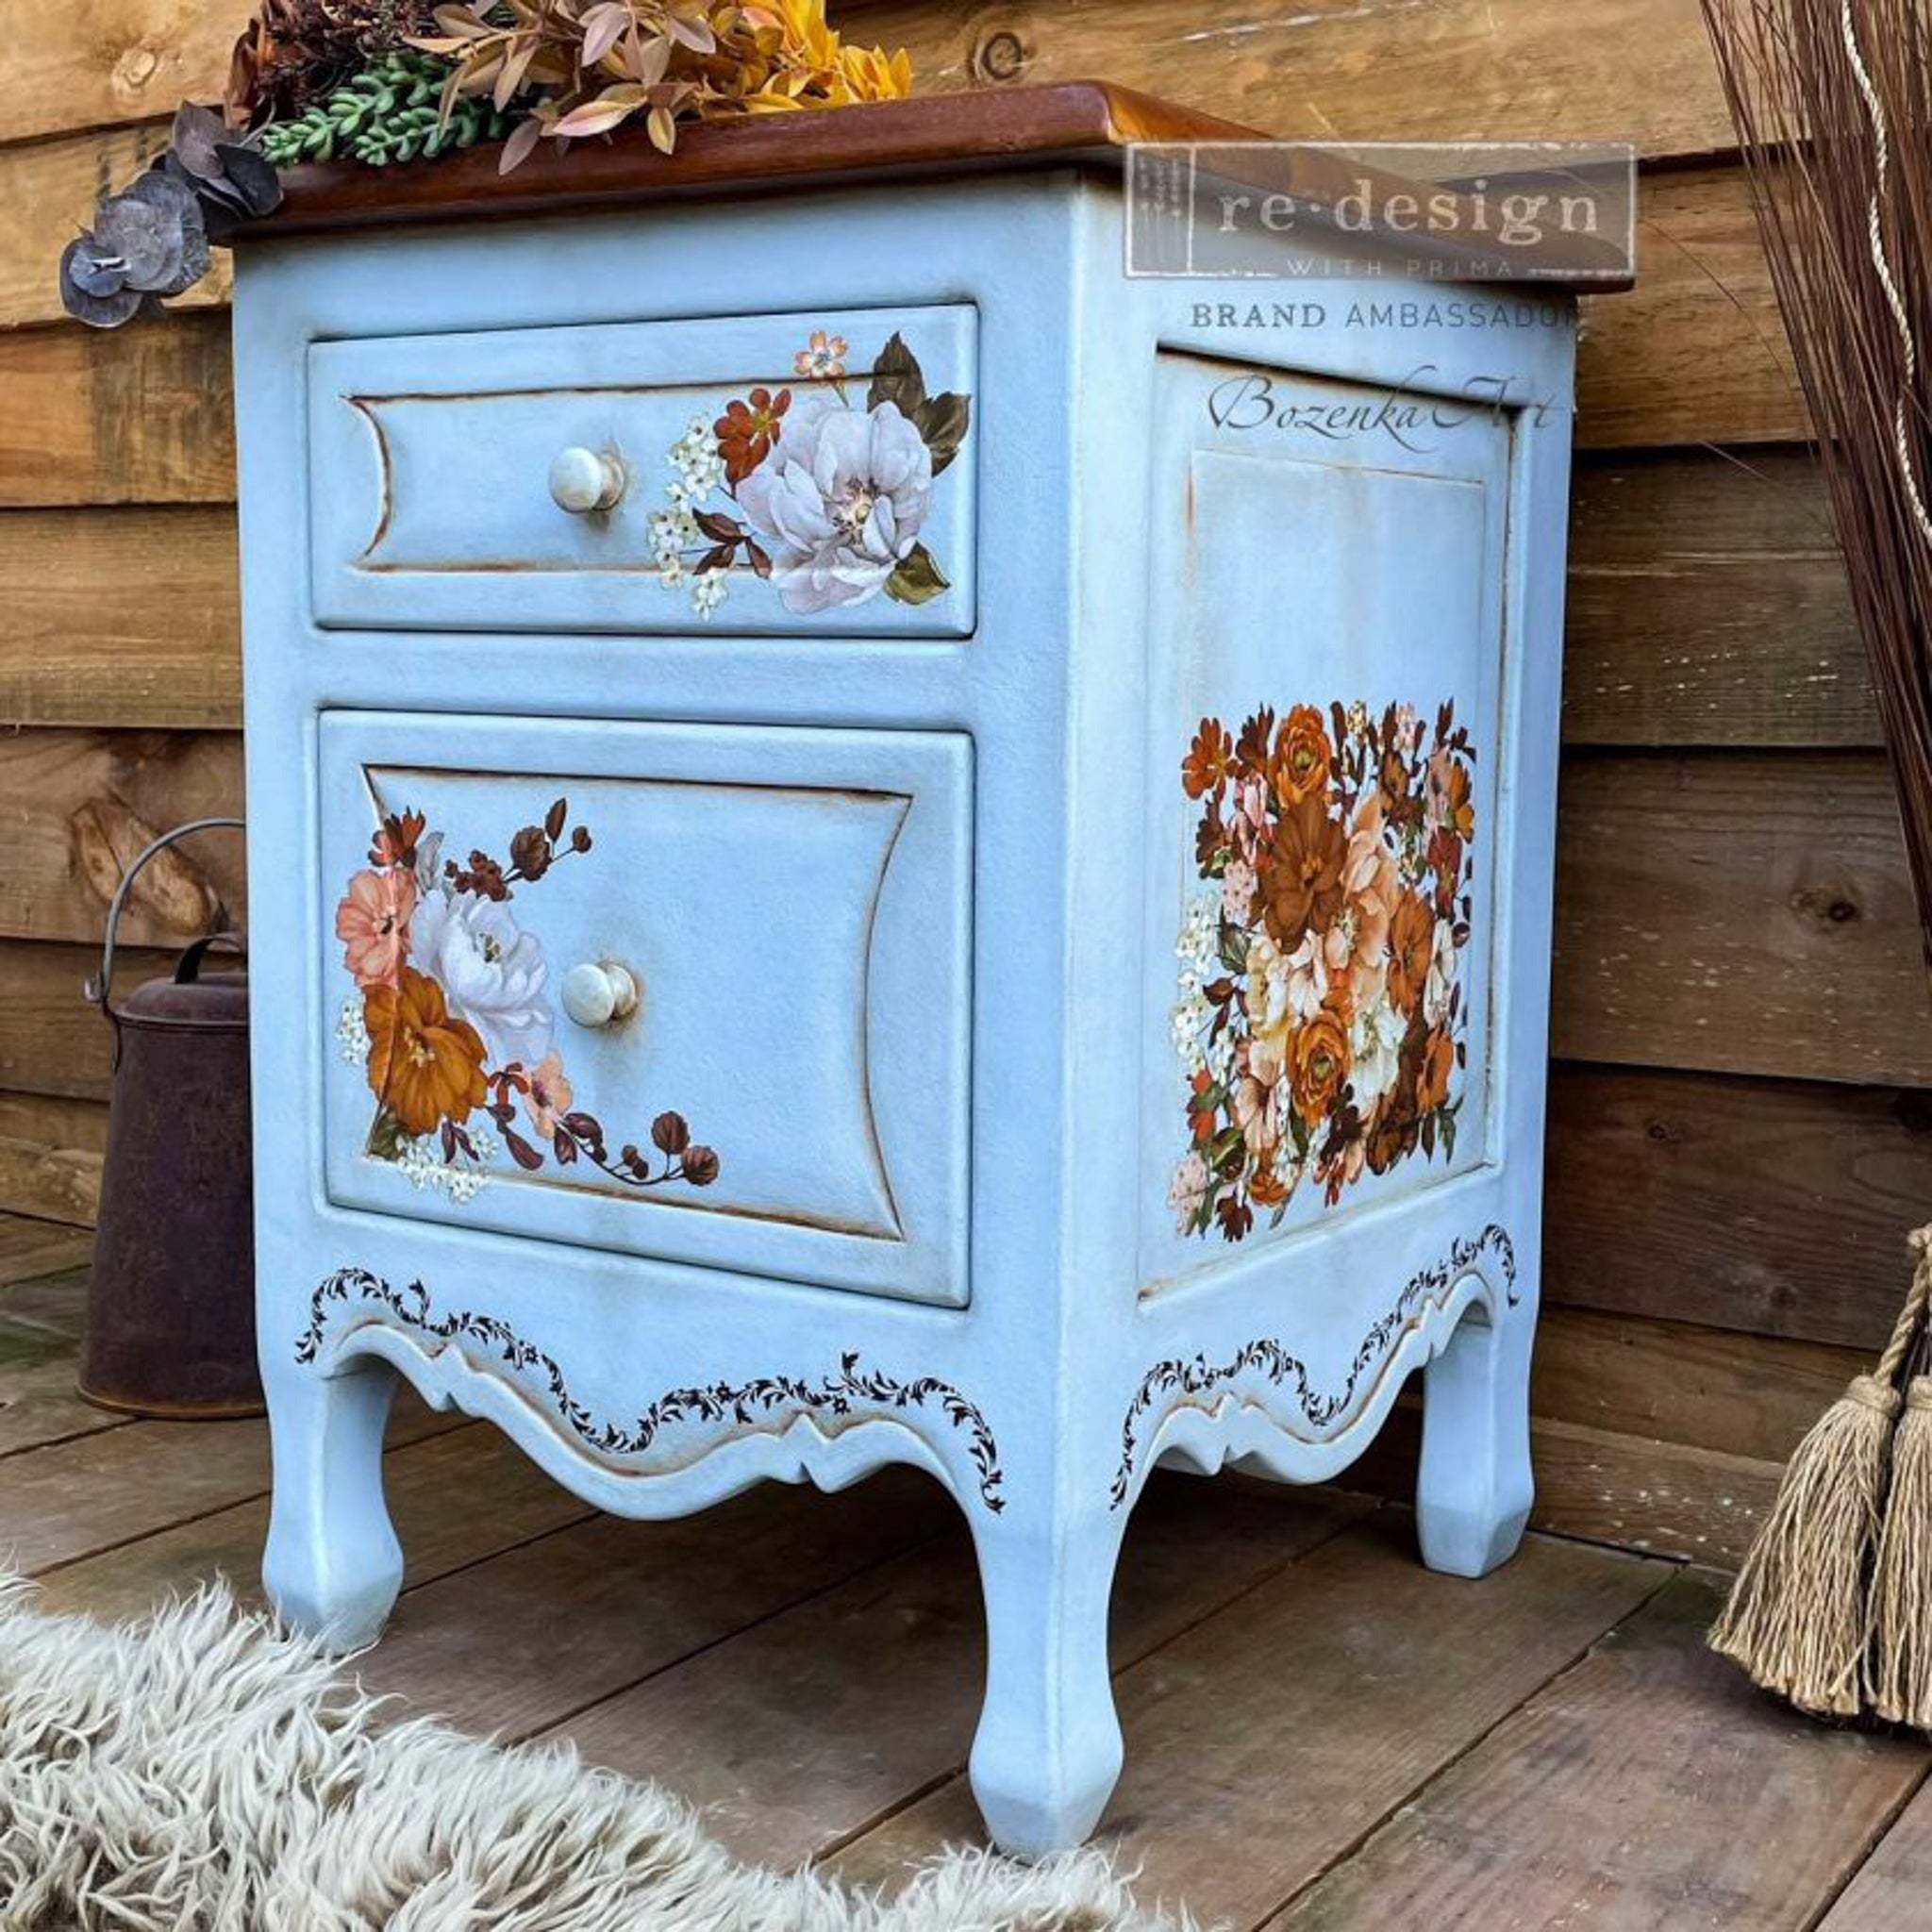 A small 2-drawer nightstand refurbished by Bozenka Art is painted a light blue and features the Classic Peach Flowers small transfer on its drawers.